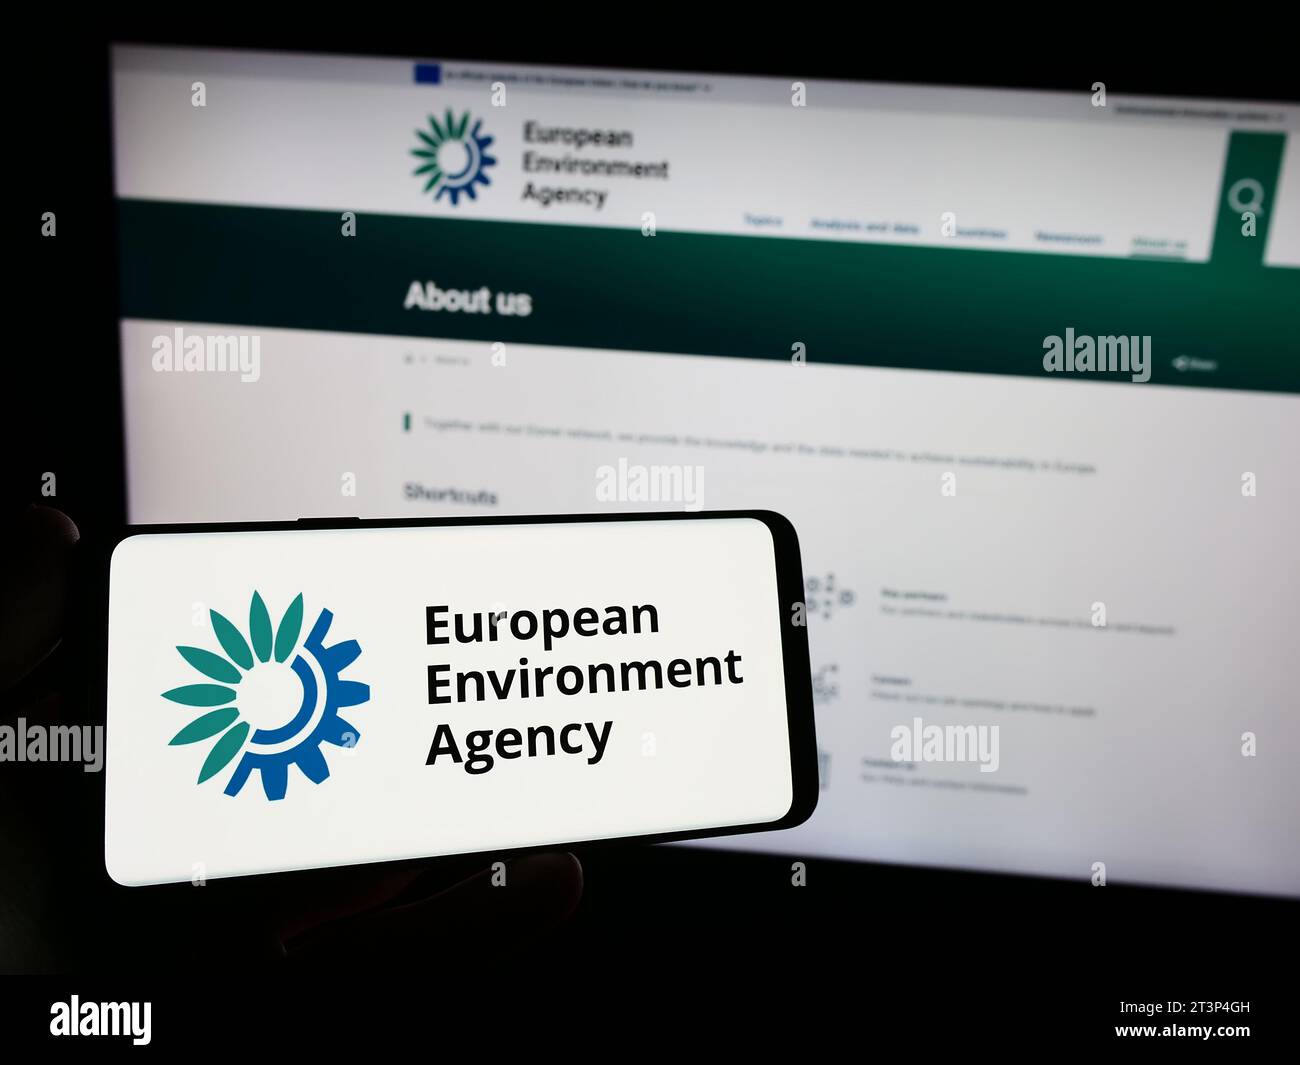 Person holding smartphone with logo of EU institution European Environment Agency (EEA) in front of website. Focus on phone display. Stock Photo